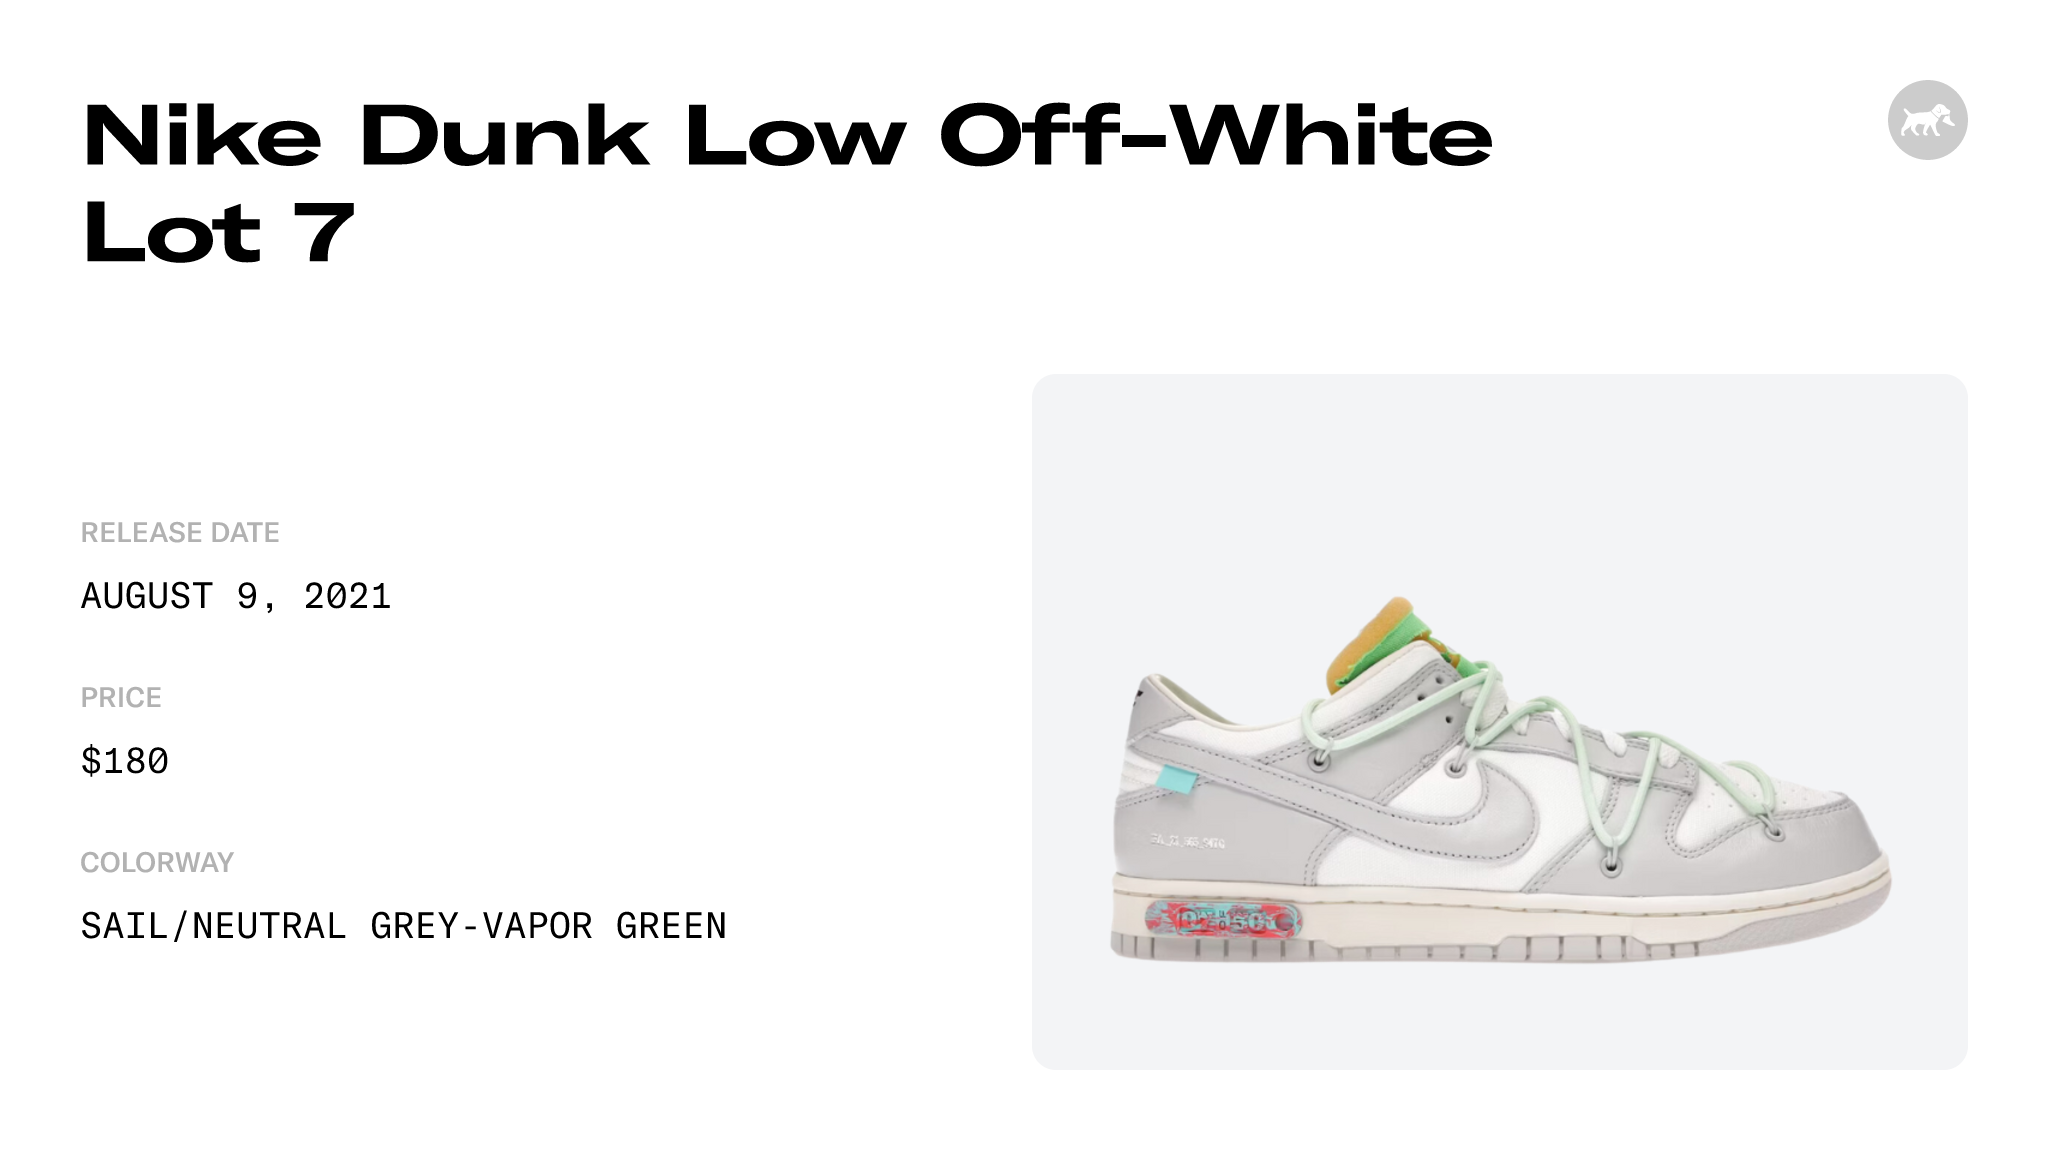 Nike Dunk Low Off-White Lot 7 Raffles and Release Date